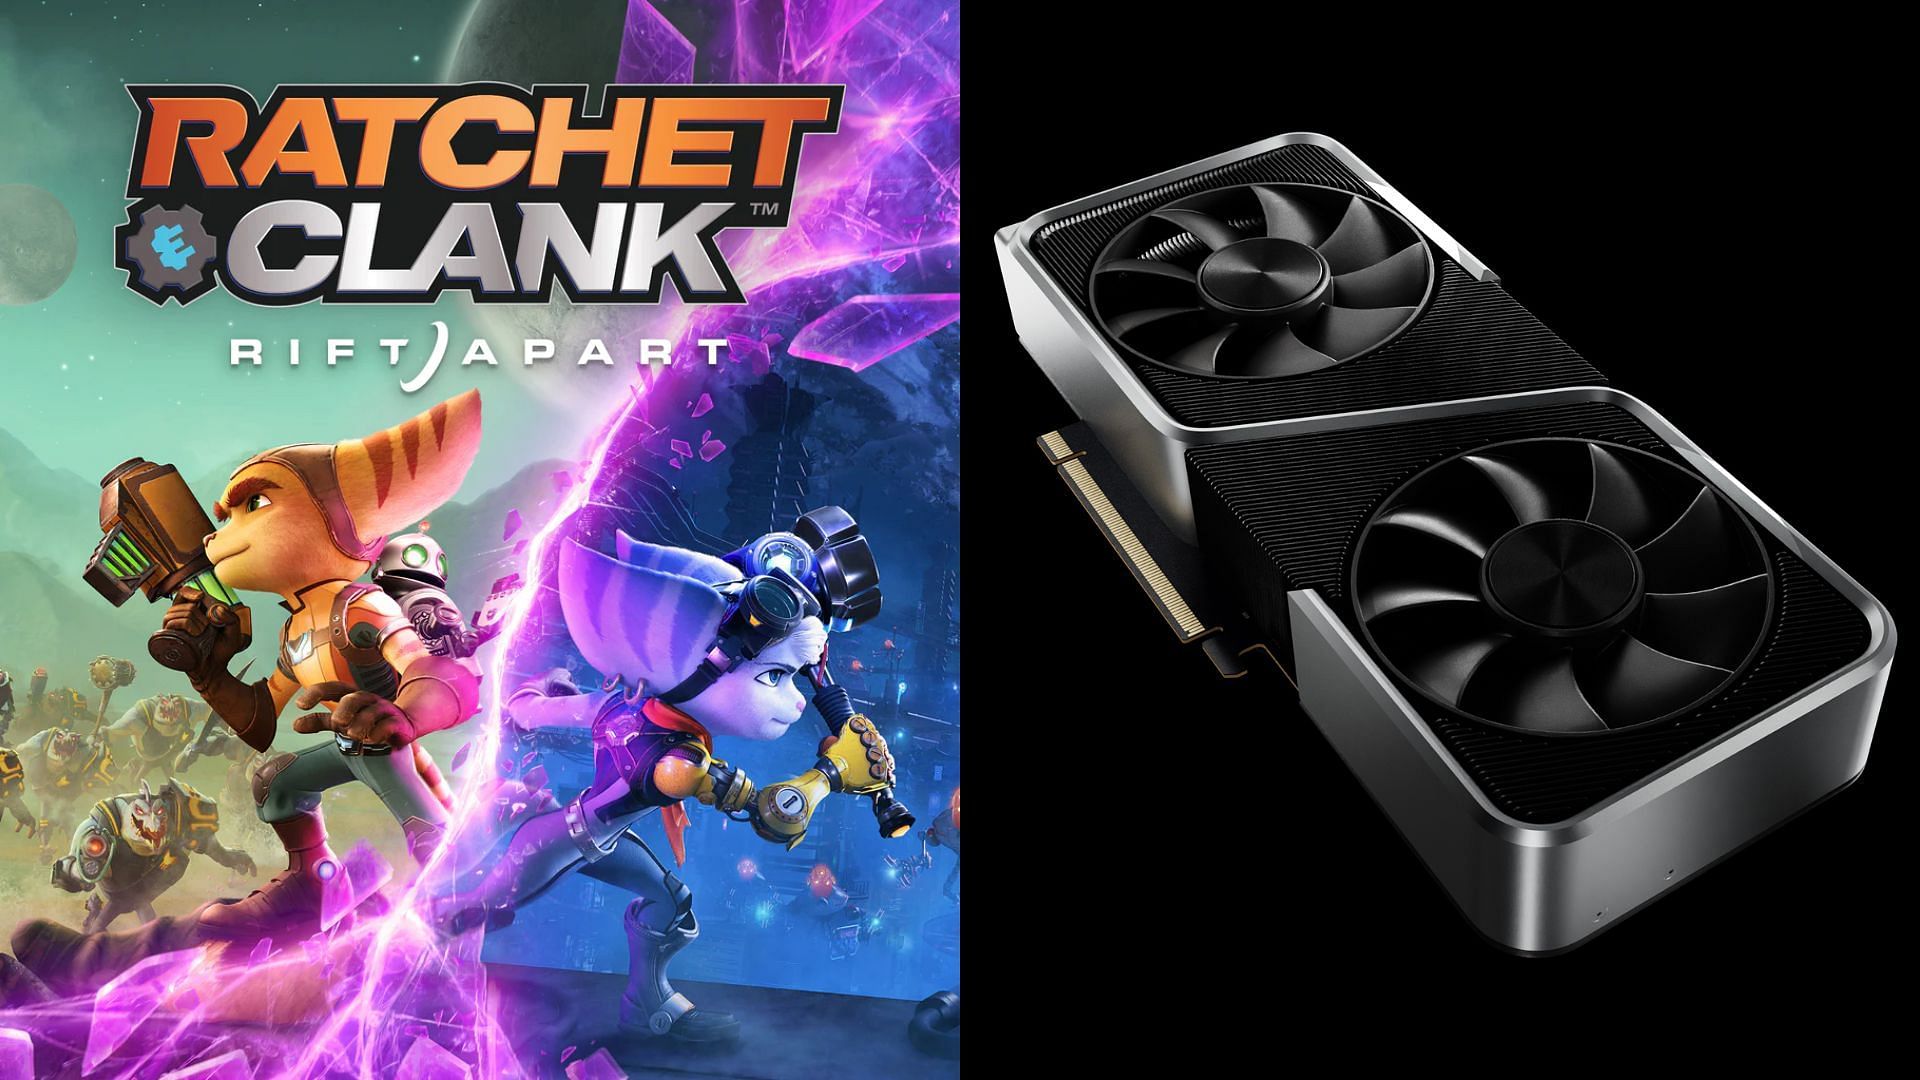 The RTX 3060 and 3060 Ti can easily handle Ratchet and Clank Rift Apart (Image via Nvidia and PlayStation)